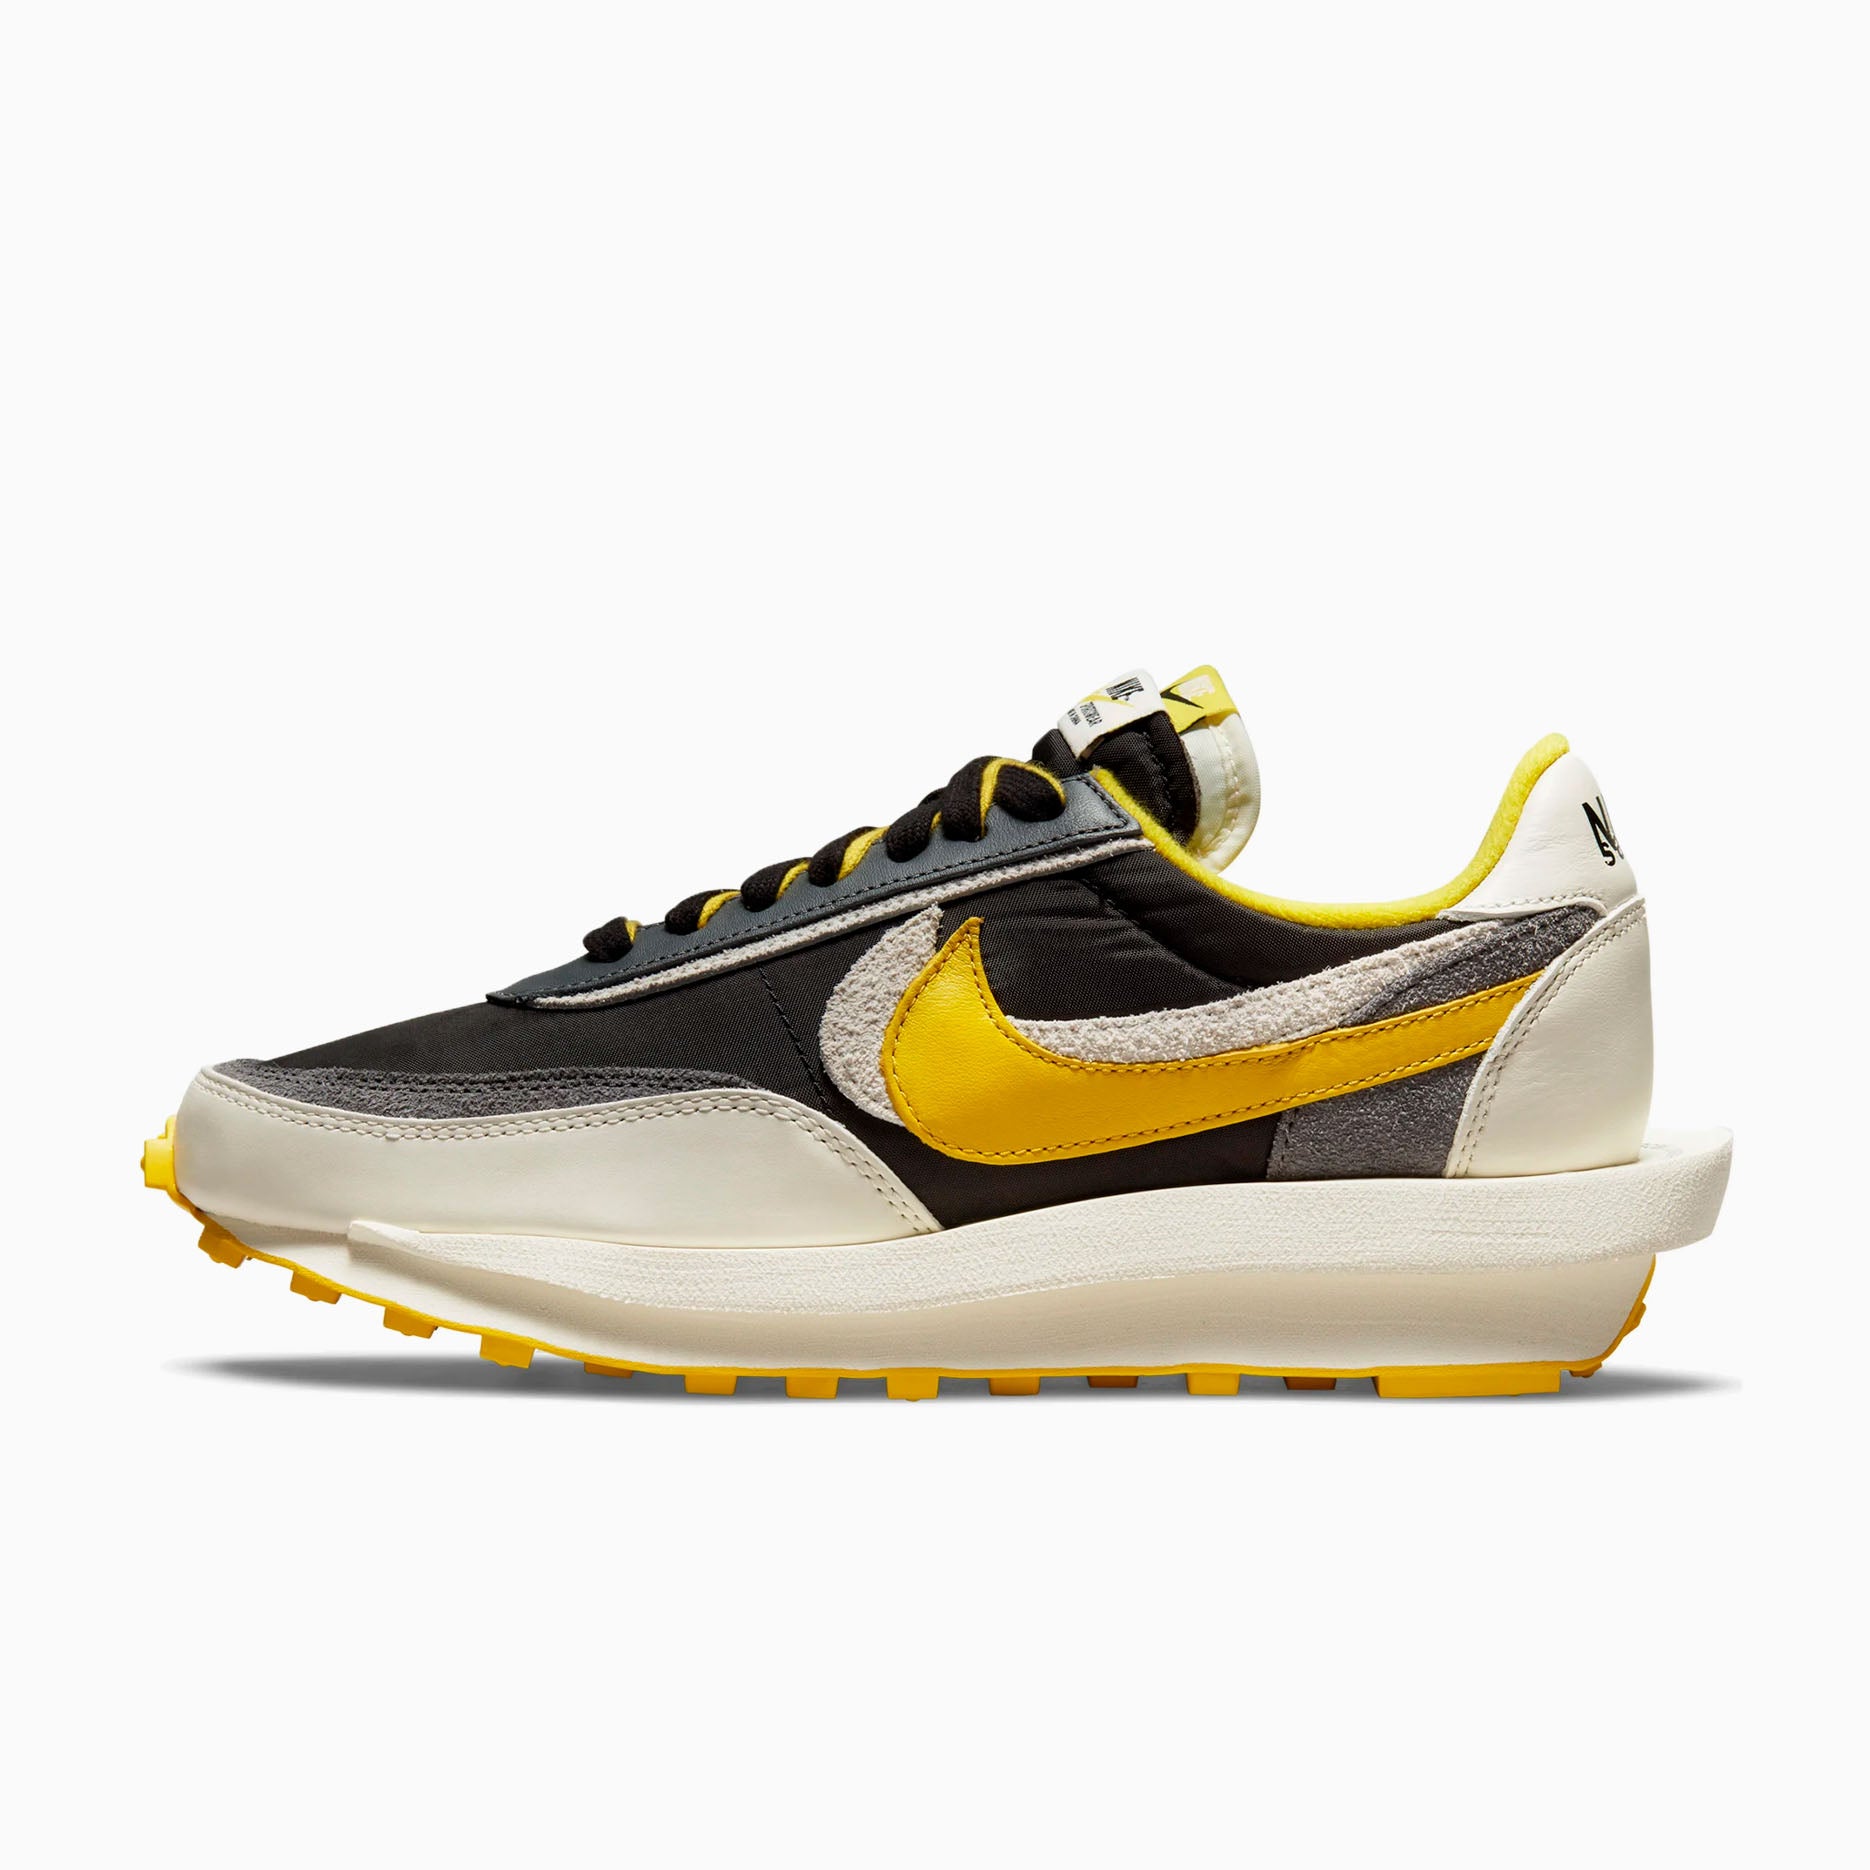 Nike LDWaffle Sacai x Undercover Bright Citron Sneakers